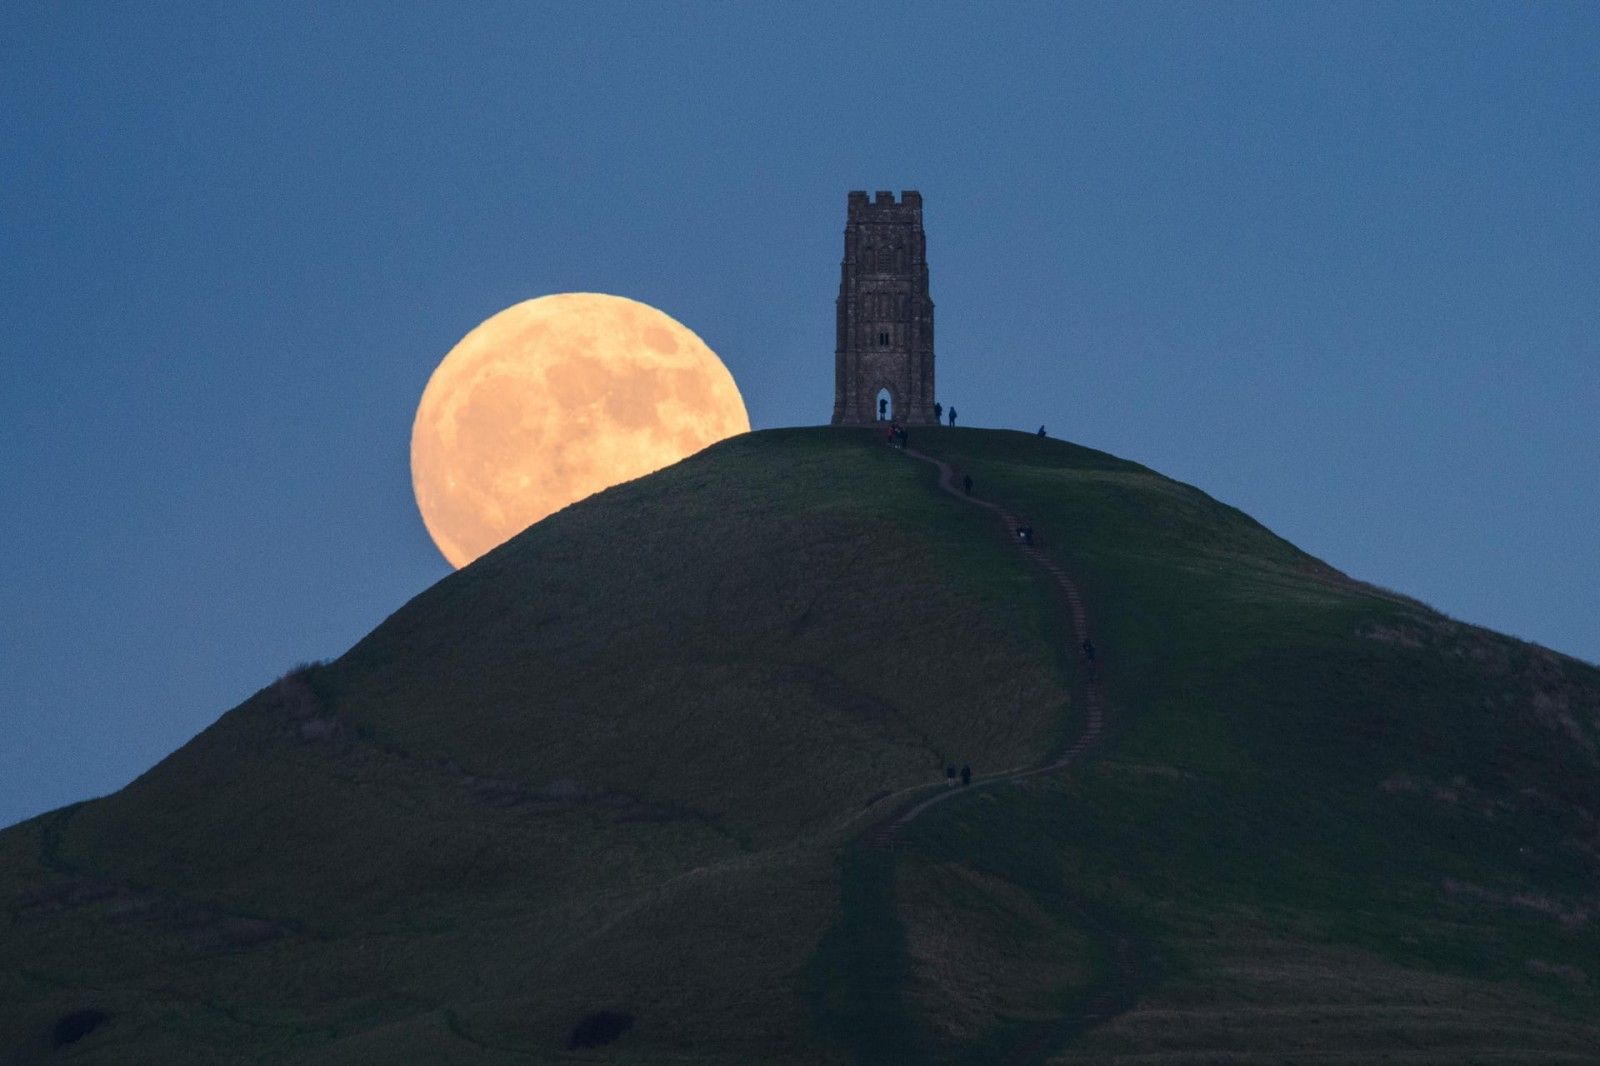 Wallpaper, nature, landscape, moonlight, Super Blood Moon, night, tower, ruin, hill, glastonbury, England, clear sky, people 1920x1280